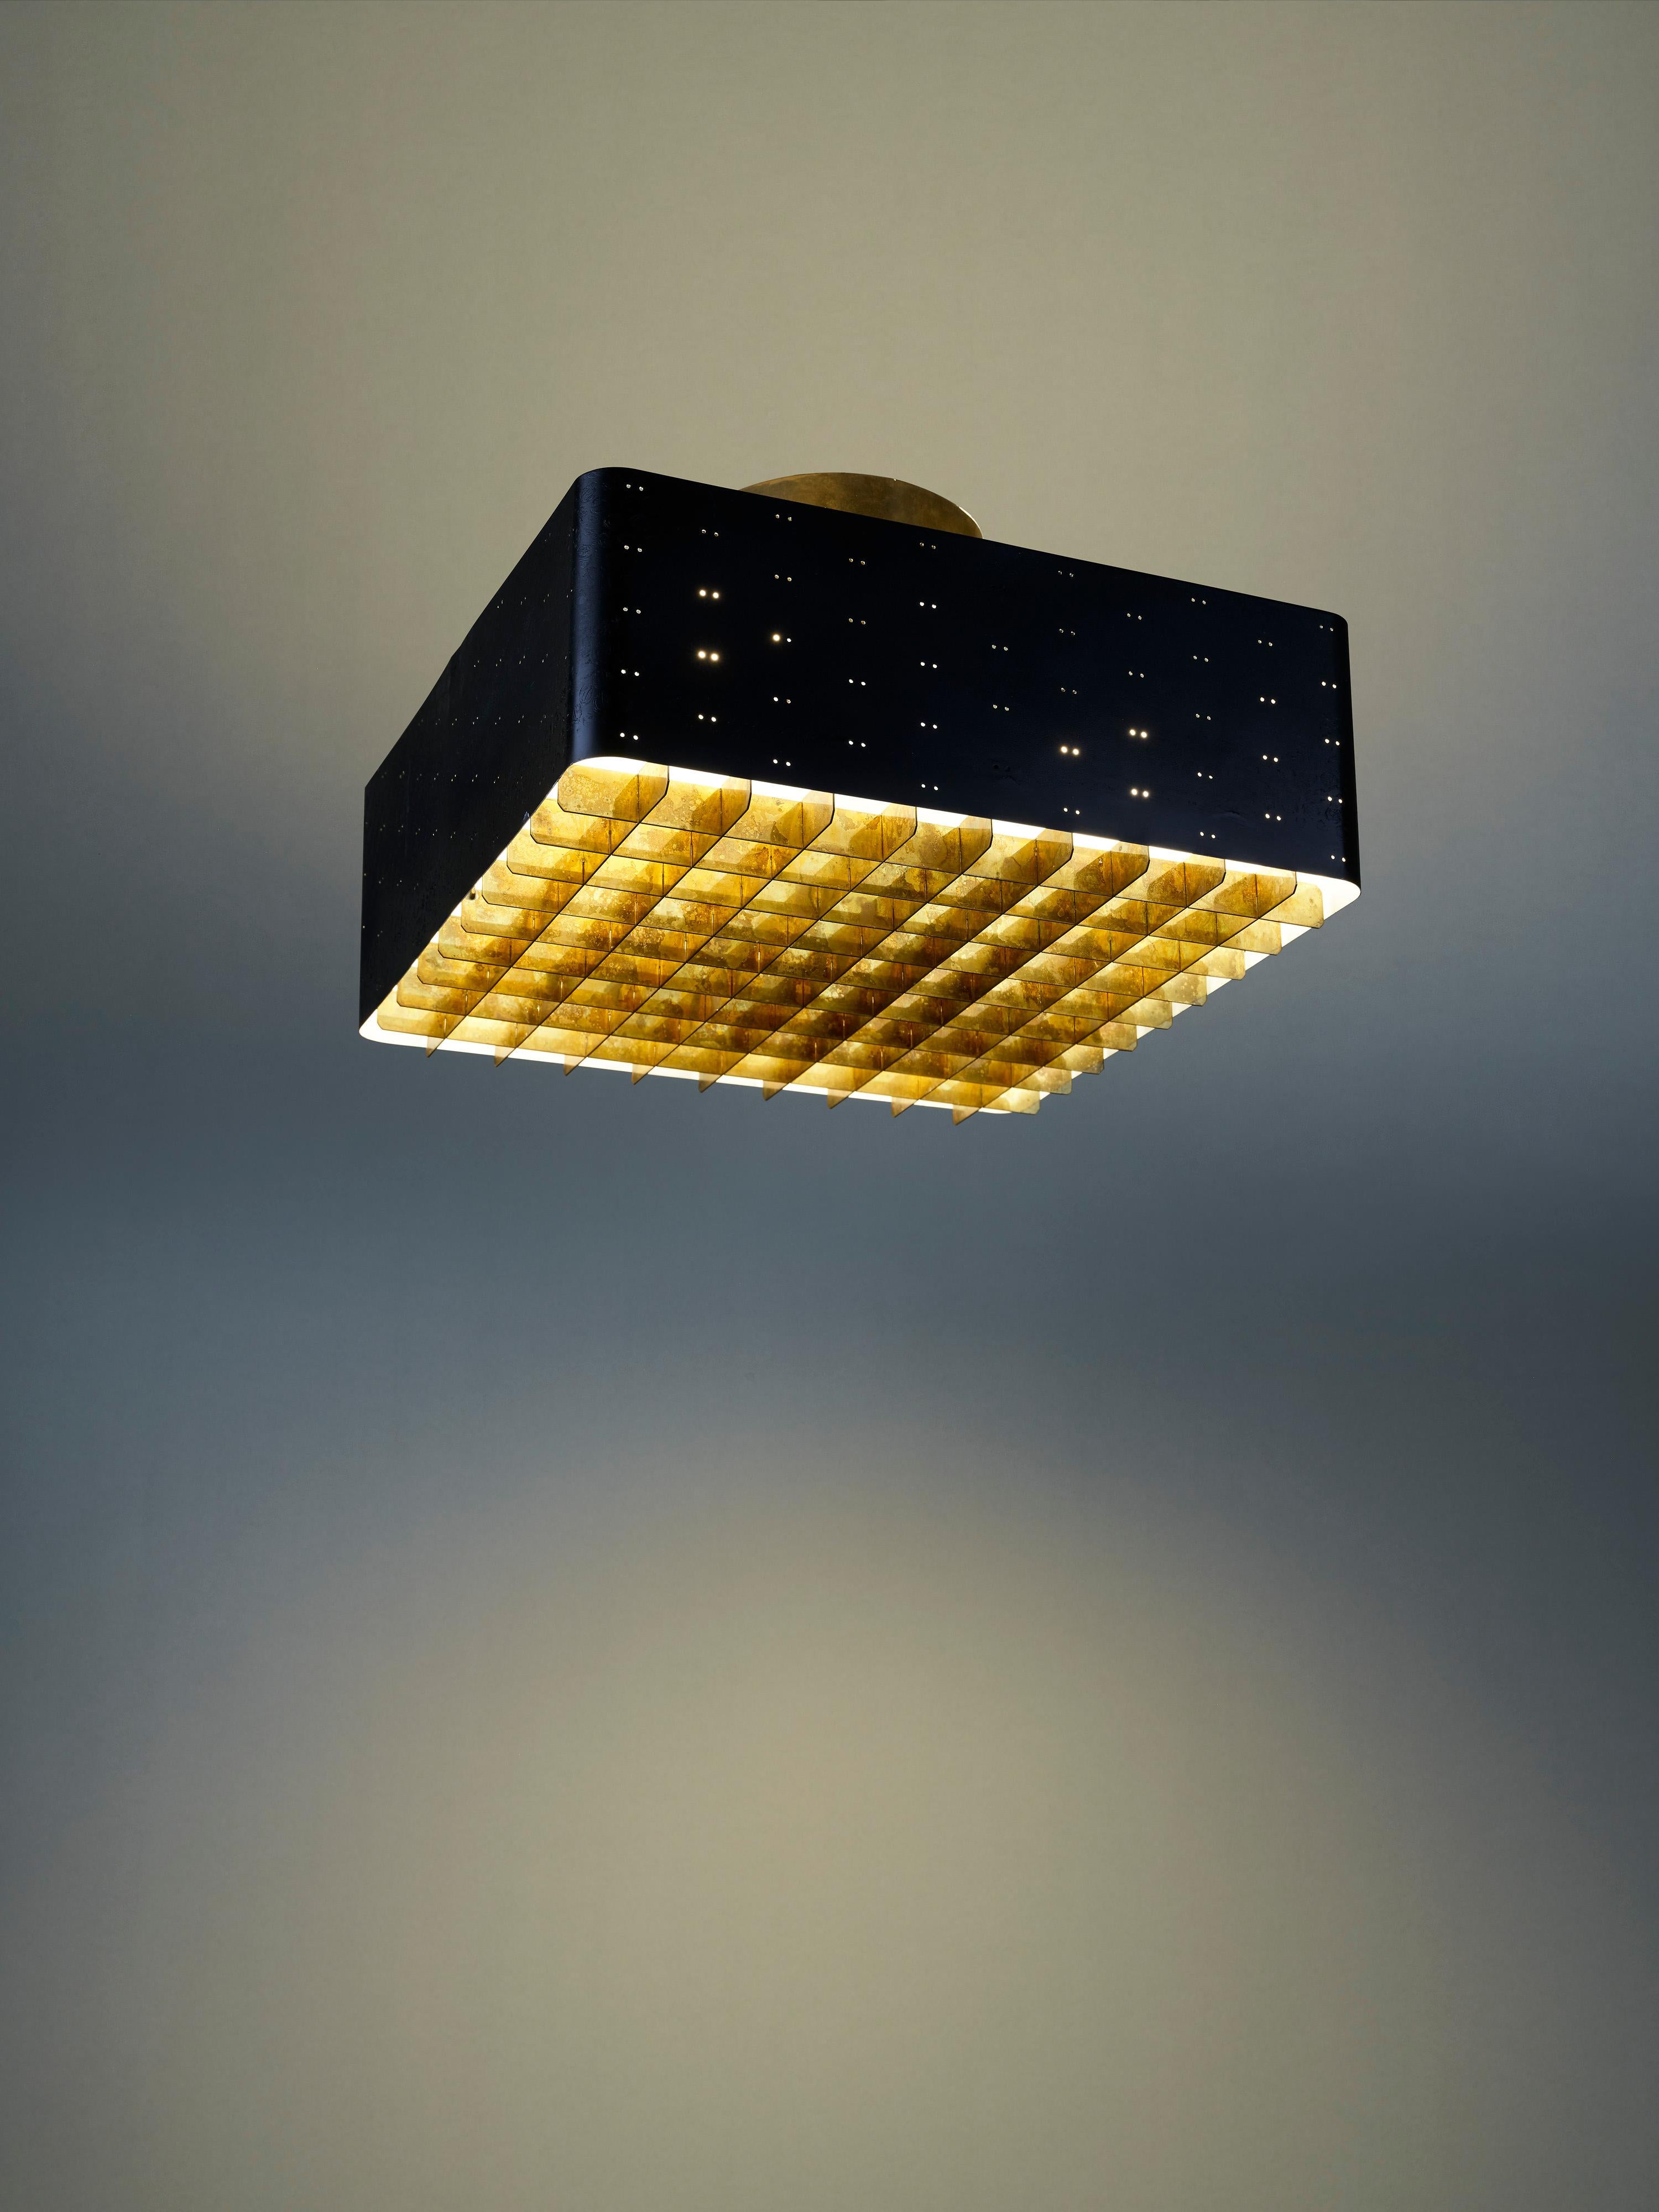 The Starry Sky stands as one of Paavo Tynell's most iconic lamp designs, produced by both Taito and Idman in various sizes. Its unique grill and side perforations create a celestial effect, resembling a starry sky when illuminated. Due to its